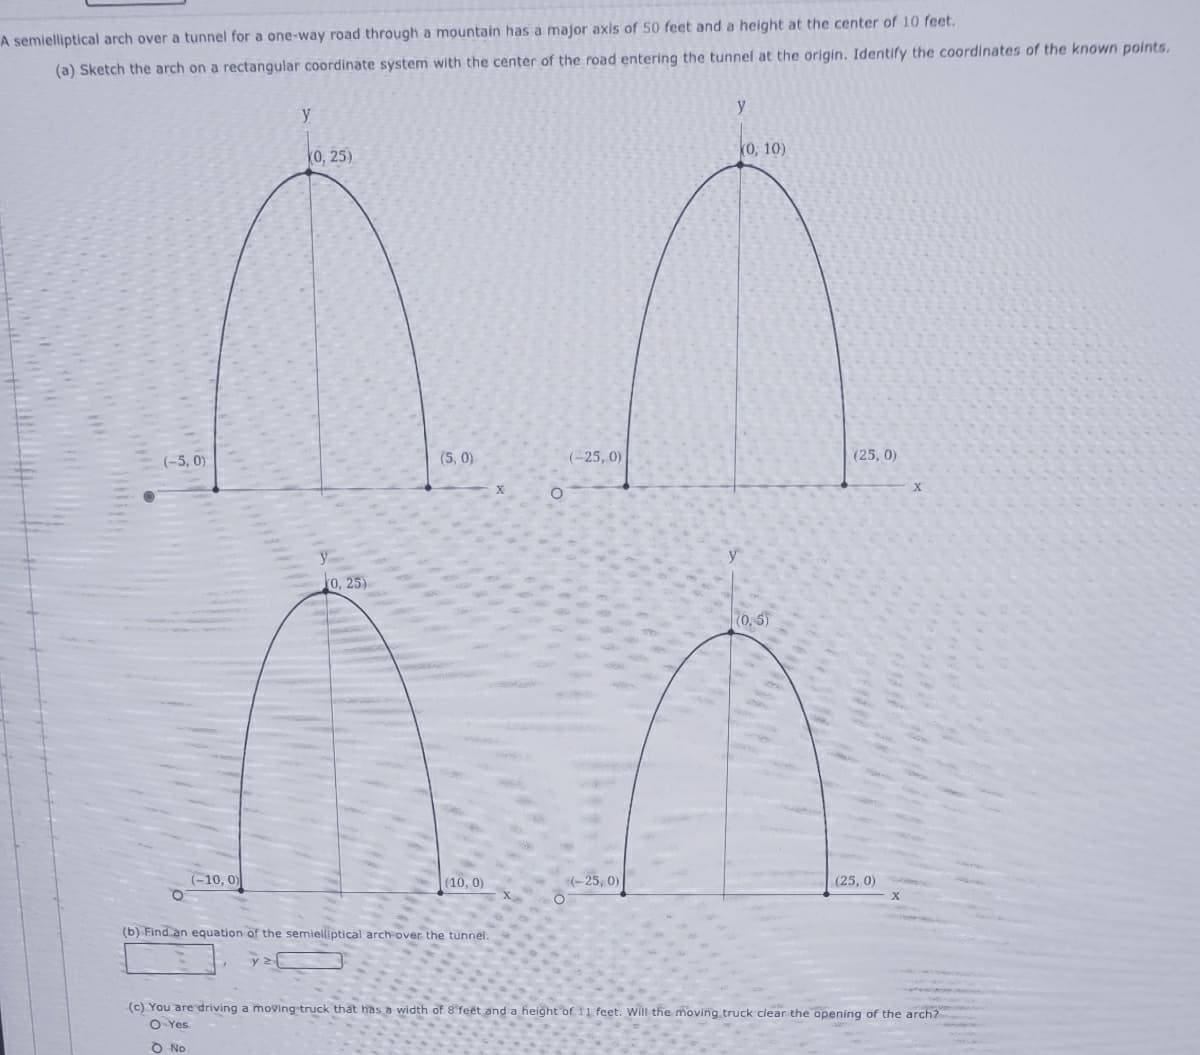 A semielliptical arch over a tunnel for a one-way road through a mountain has a major axis of 50 feet and a height at the center of 10 feet.
(a) Sketch the arch on a rectangular coordinate system with the center of the road entering the tunnel at the origin. Identify the coordinates of the known points.
y
y
0, 25)
k0, 10)
(-5, 0)
(5, 0)
(-25, 0)
(25, 0)
y
0, 25)
70, 5
(-10, 0)
(10, 0)
(-25, 0)
(25, 0)
(b) Find an equation of the semielliptical arch over the tunnel.
(c) You are driving a moving truck that has a width of 8 feet and a height of 11 feet. Will the moving truck clear the opening of the arch?
O Yes
O No
